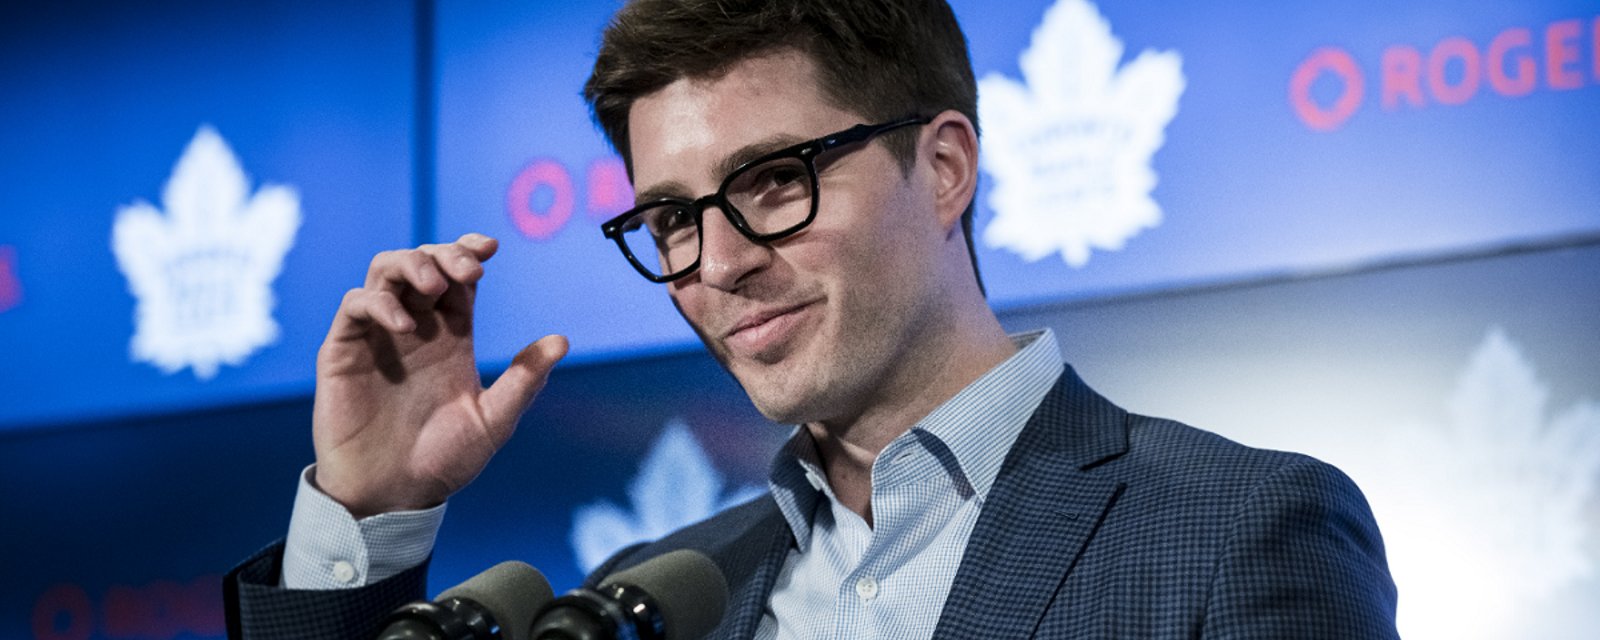 Kyle Dubas orchestrating a plan to bring in Matthew Knies?